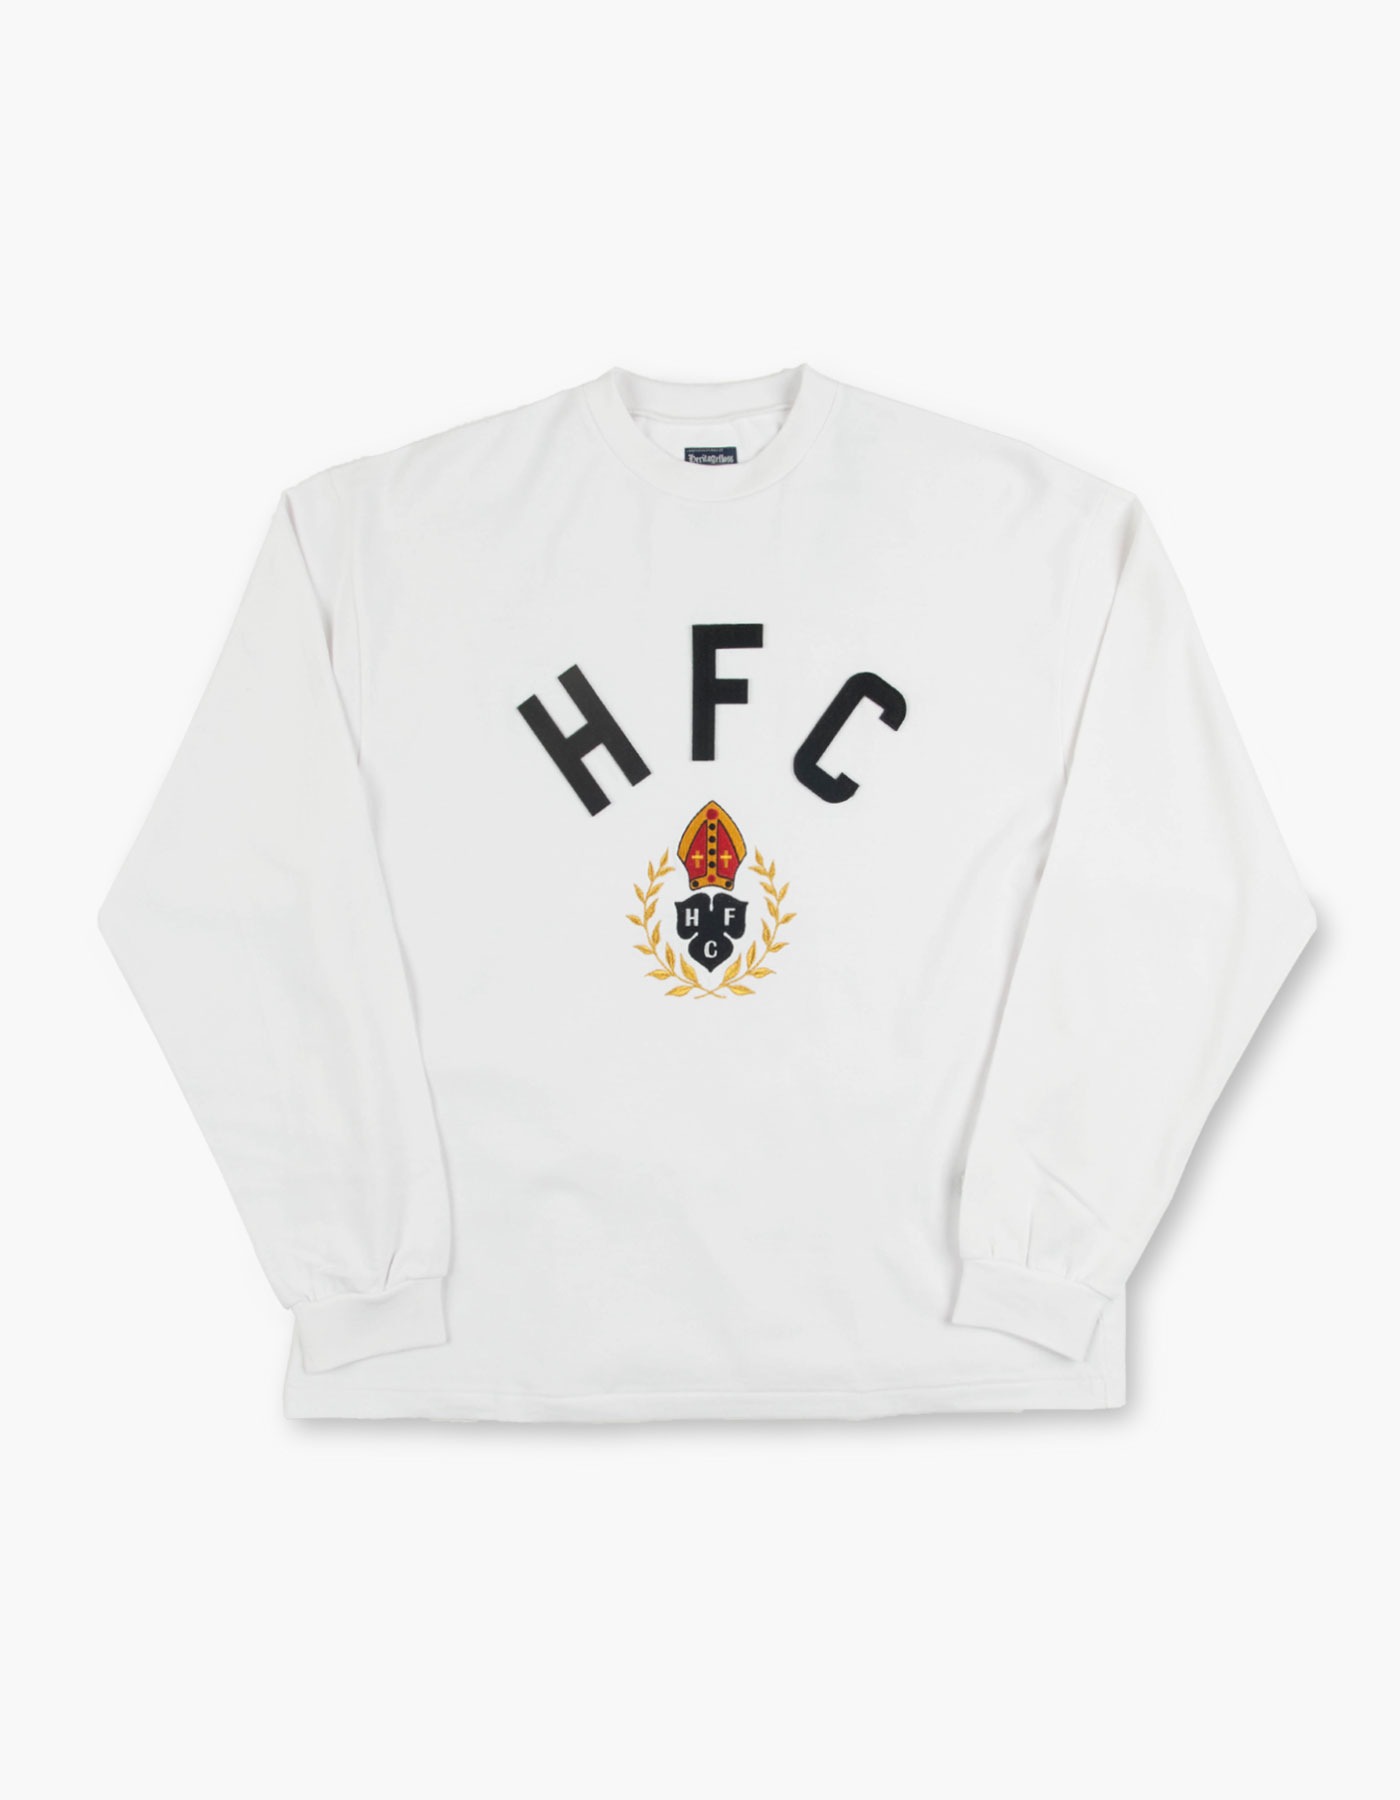 HFC CREST 10S COMPACT YARN MOC-NECK / WHITE